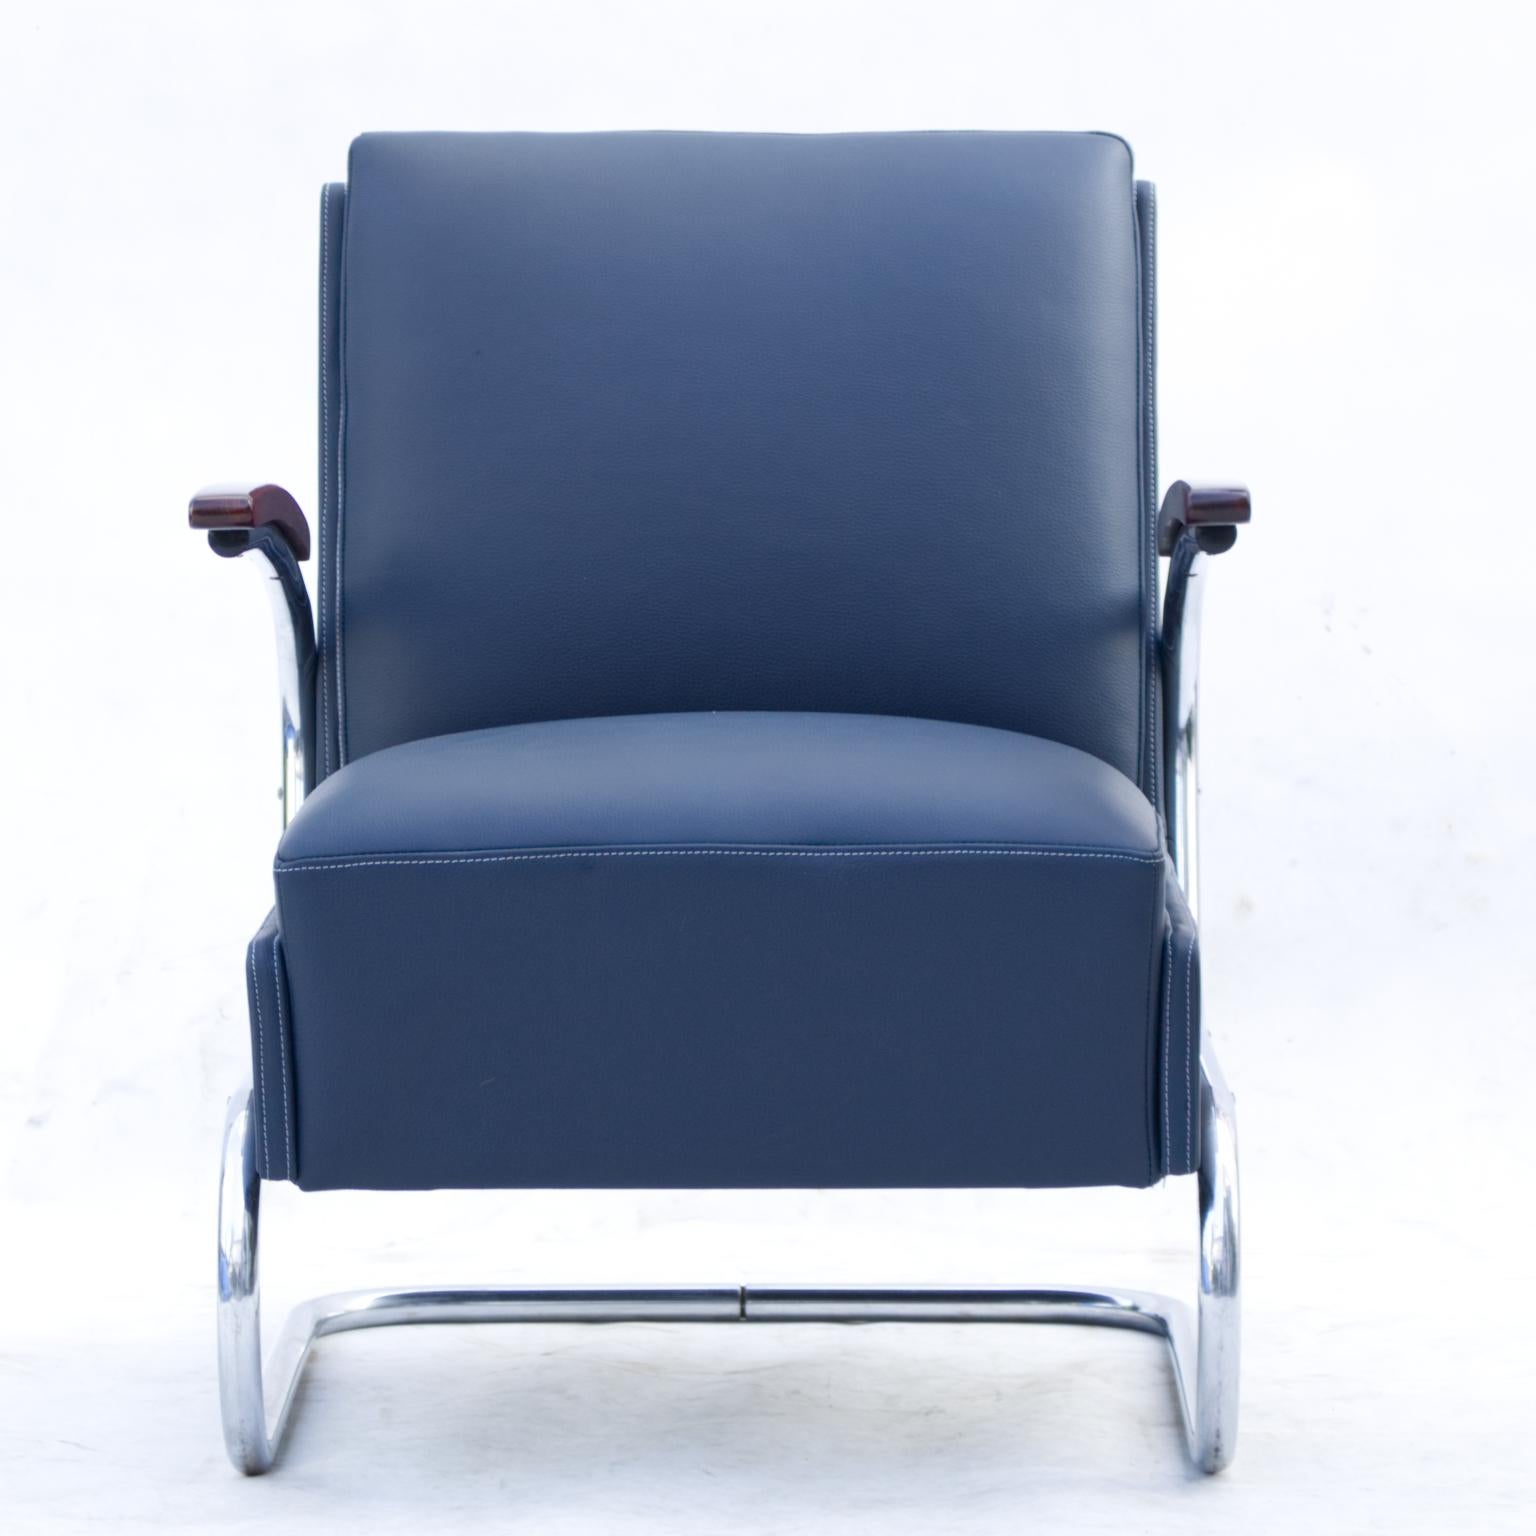 Armchair model Fn 24 by Mücke & Melder, circa 1930s Bauhaus period. New blue natural cow leather upholstery. Nickel-plated tubular steel construction is in a good original condition. 3 pcs available.
Price for 1 piece.

 